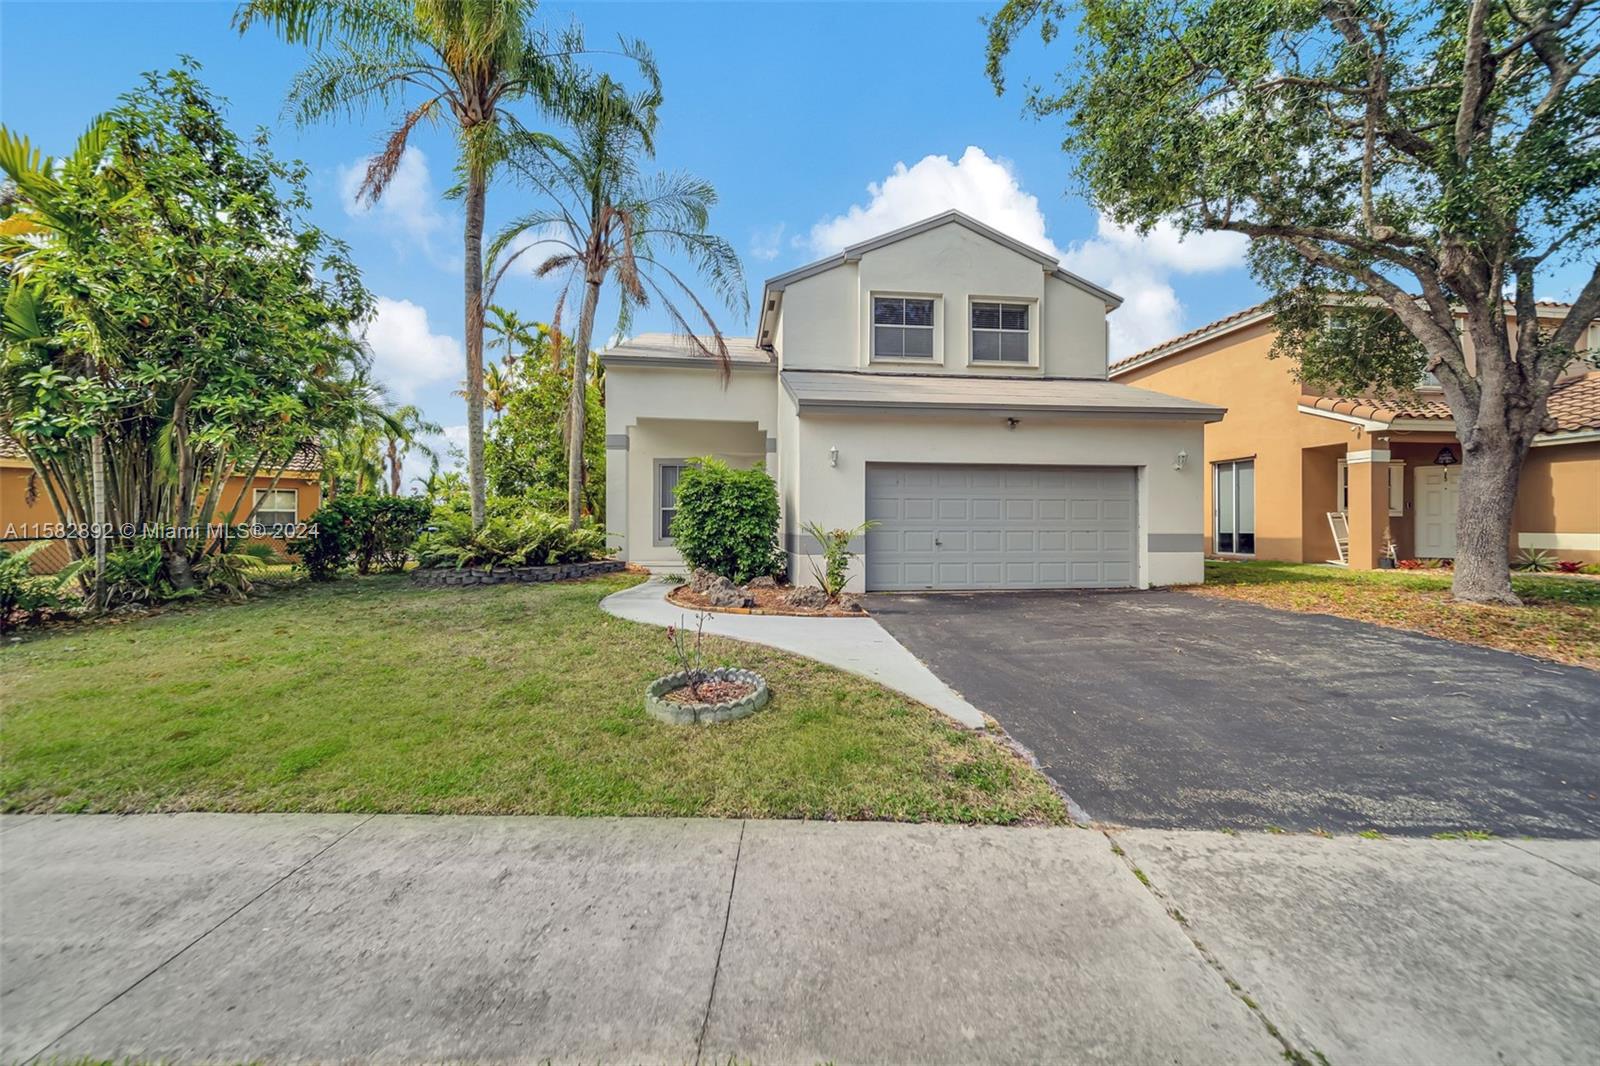 18470 Nw 19th St, Pembroke Pines, Miami-Dade County, Florida - 4 Bedrooms  
3 Bathrooms - 